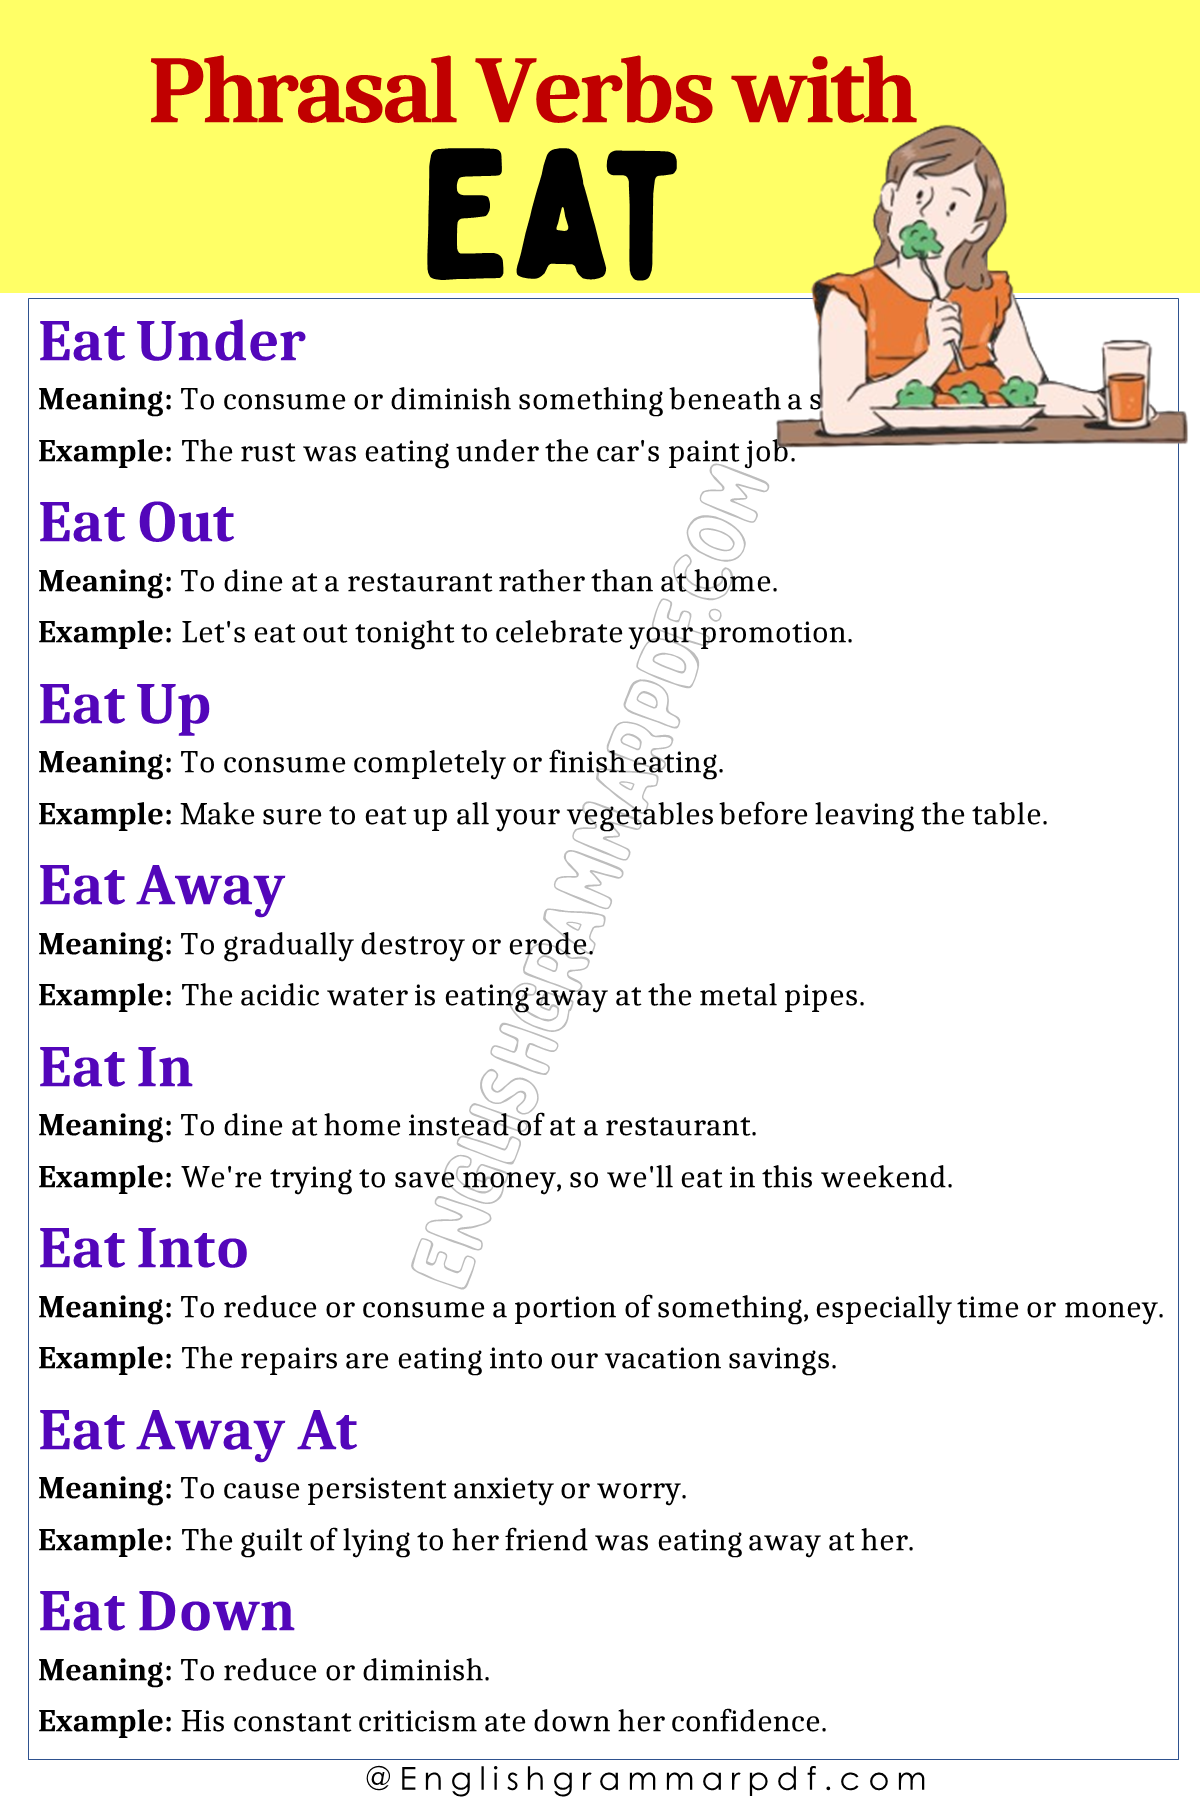 Phrasal Verbs with Eat